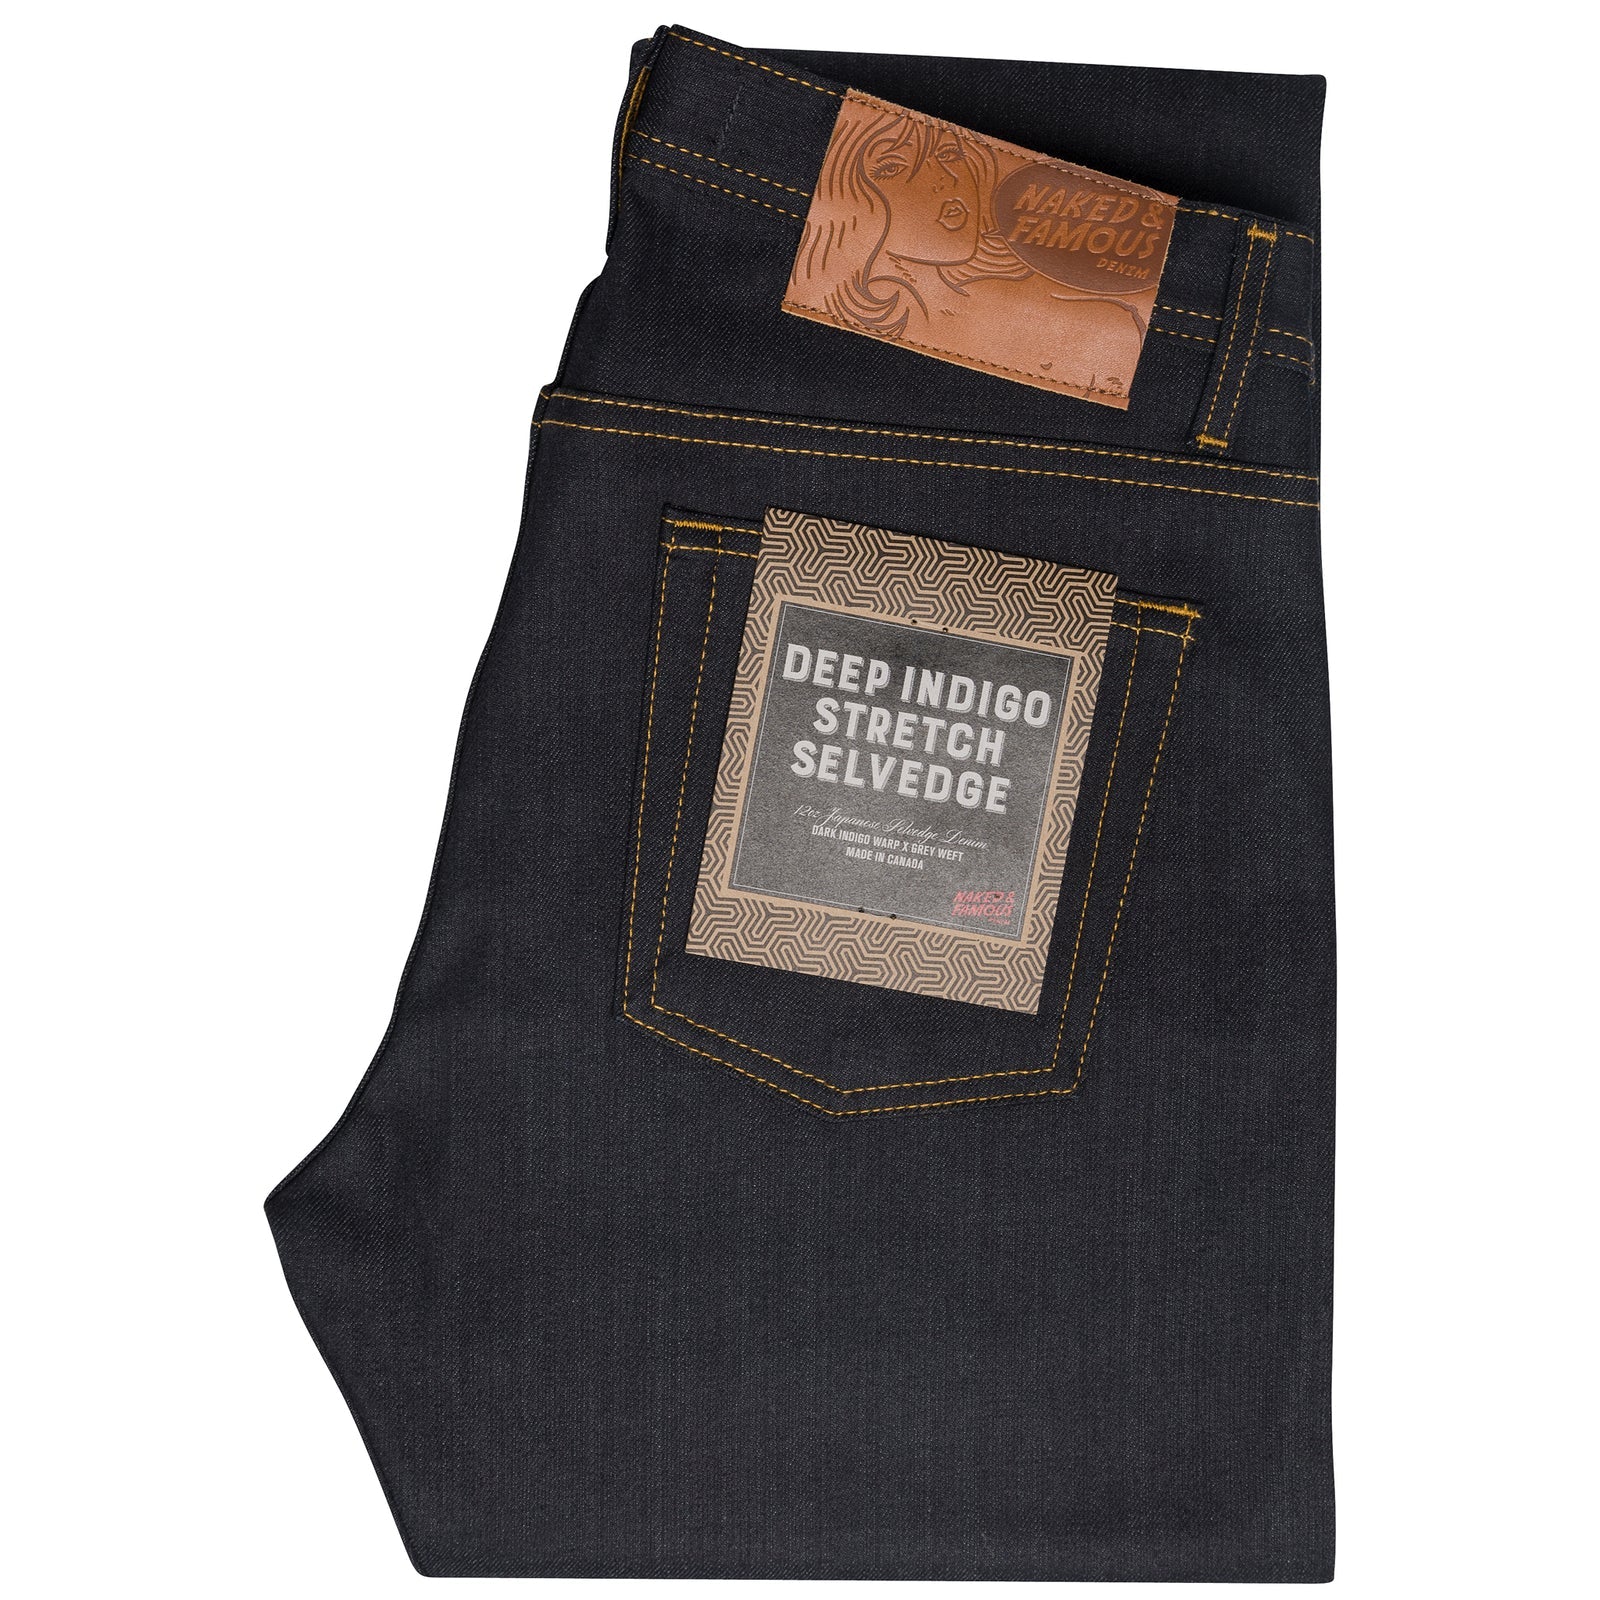 Naked and Famous Men's Weird Guy Deep Indigo Stretch Selvedge 019513.